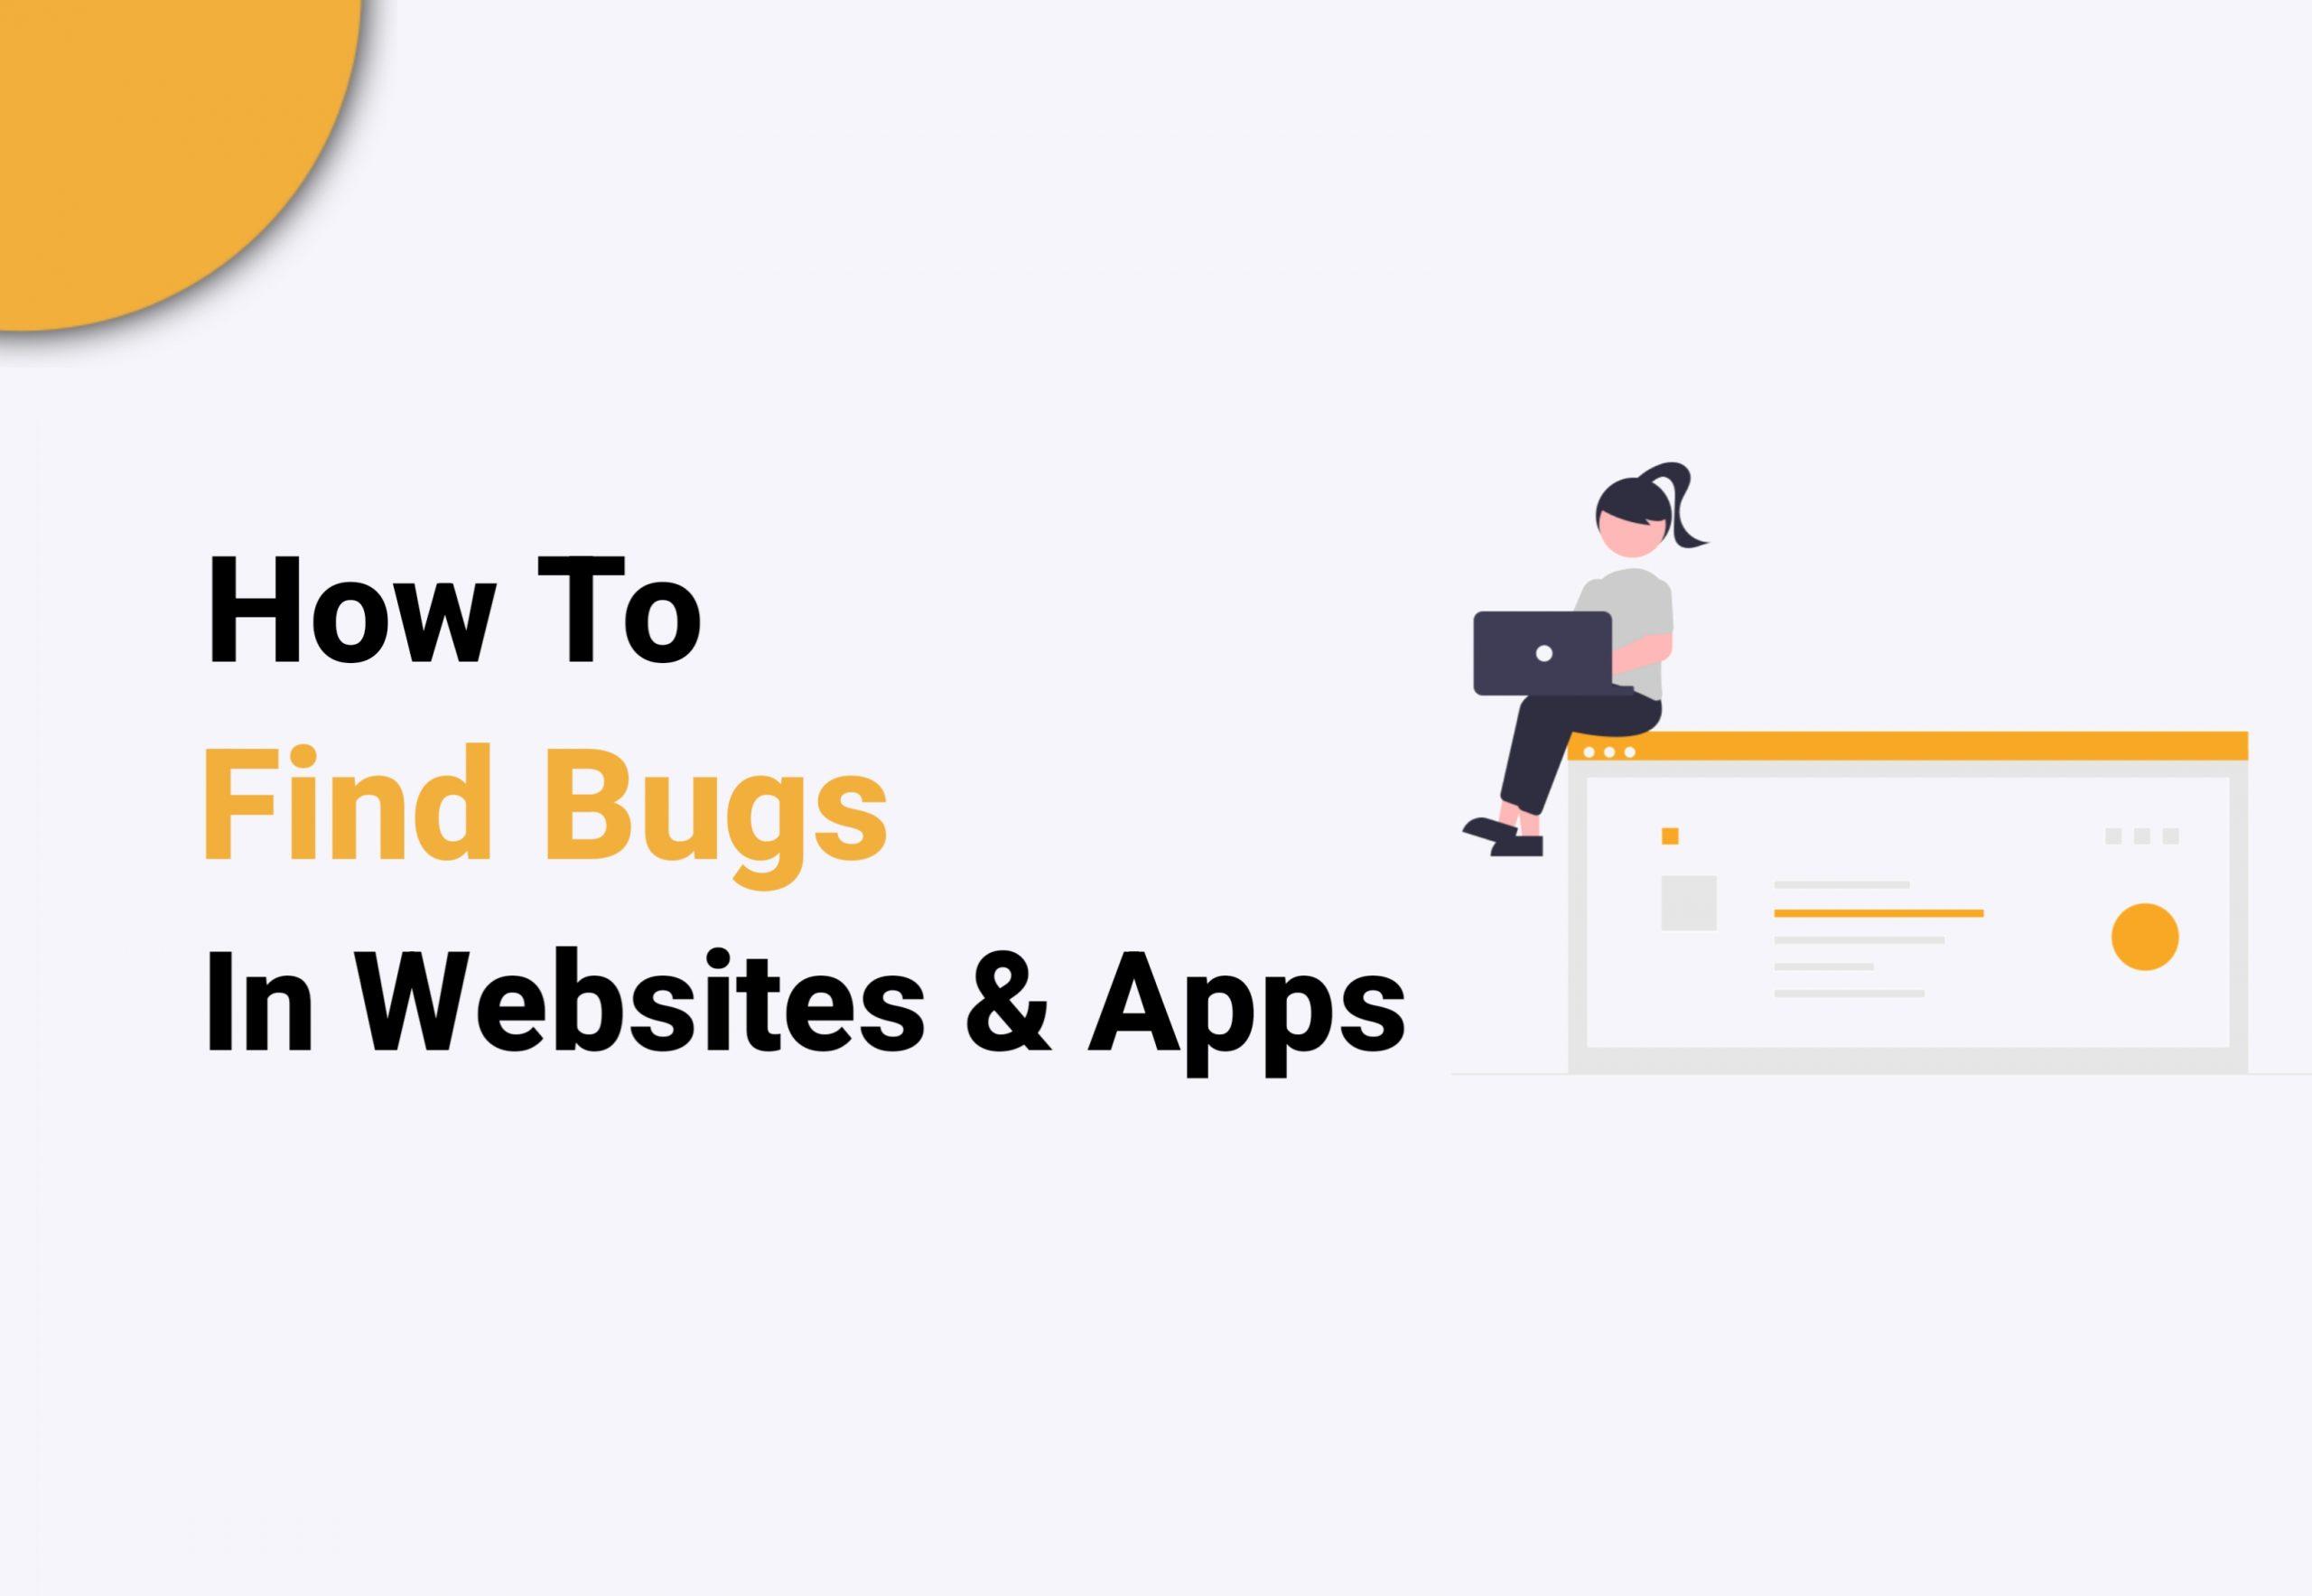 How to Find Bugs in Websites and Apps